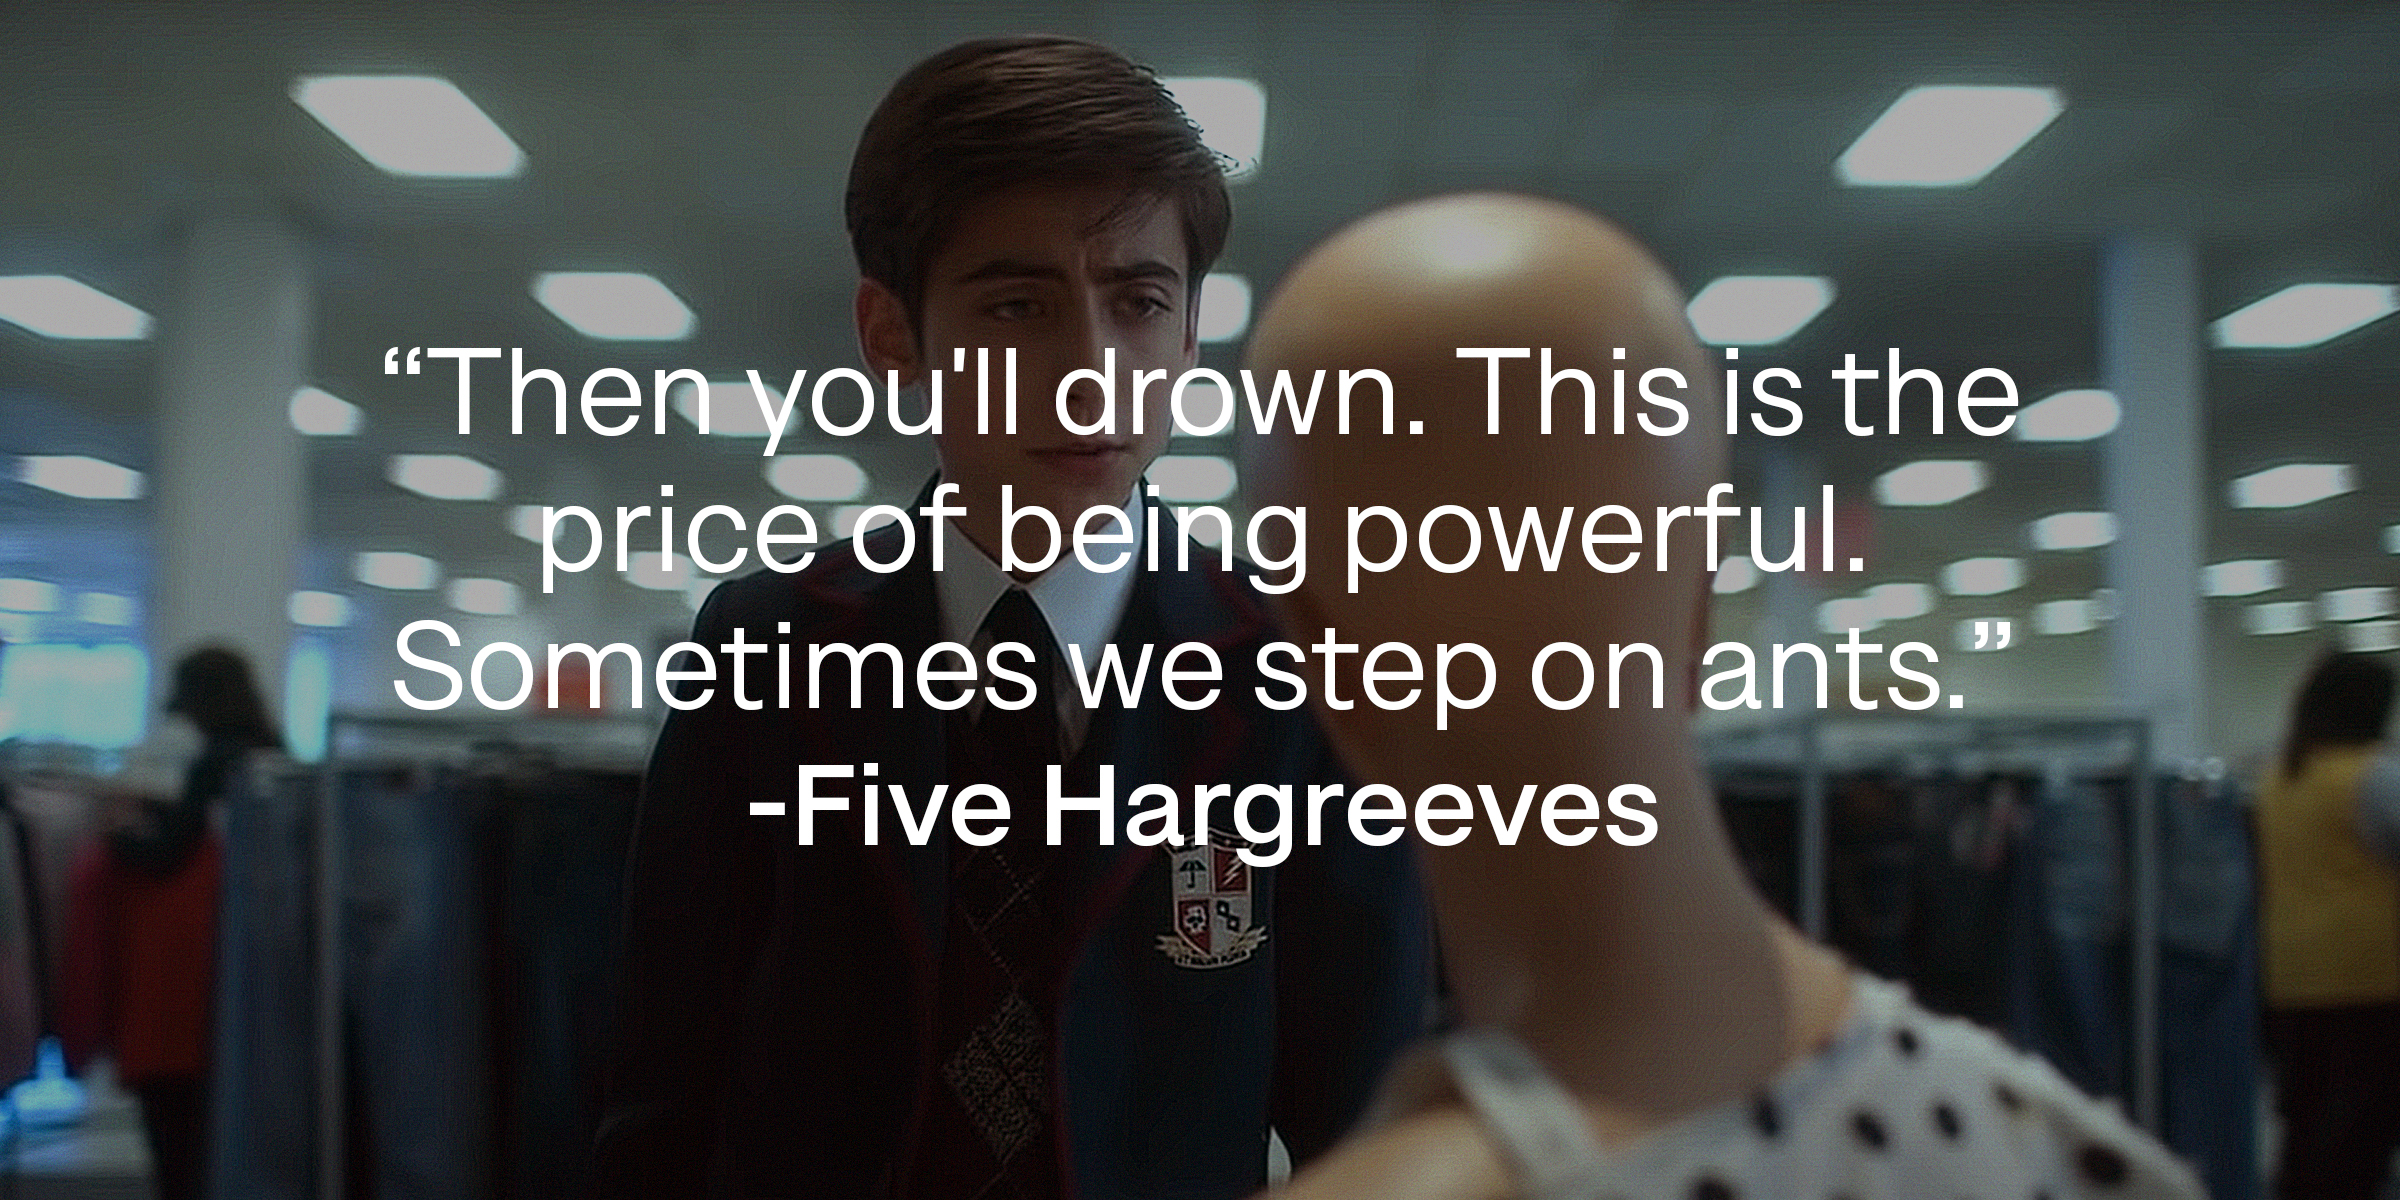 Five Hargreeves, with Five Hargreeves' quote: "Then you'll drown. This is the price of being powerful. Sometimes we step on ants." | Source: youtube.com/Netflix